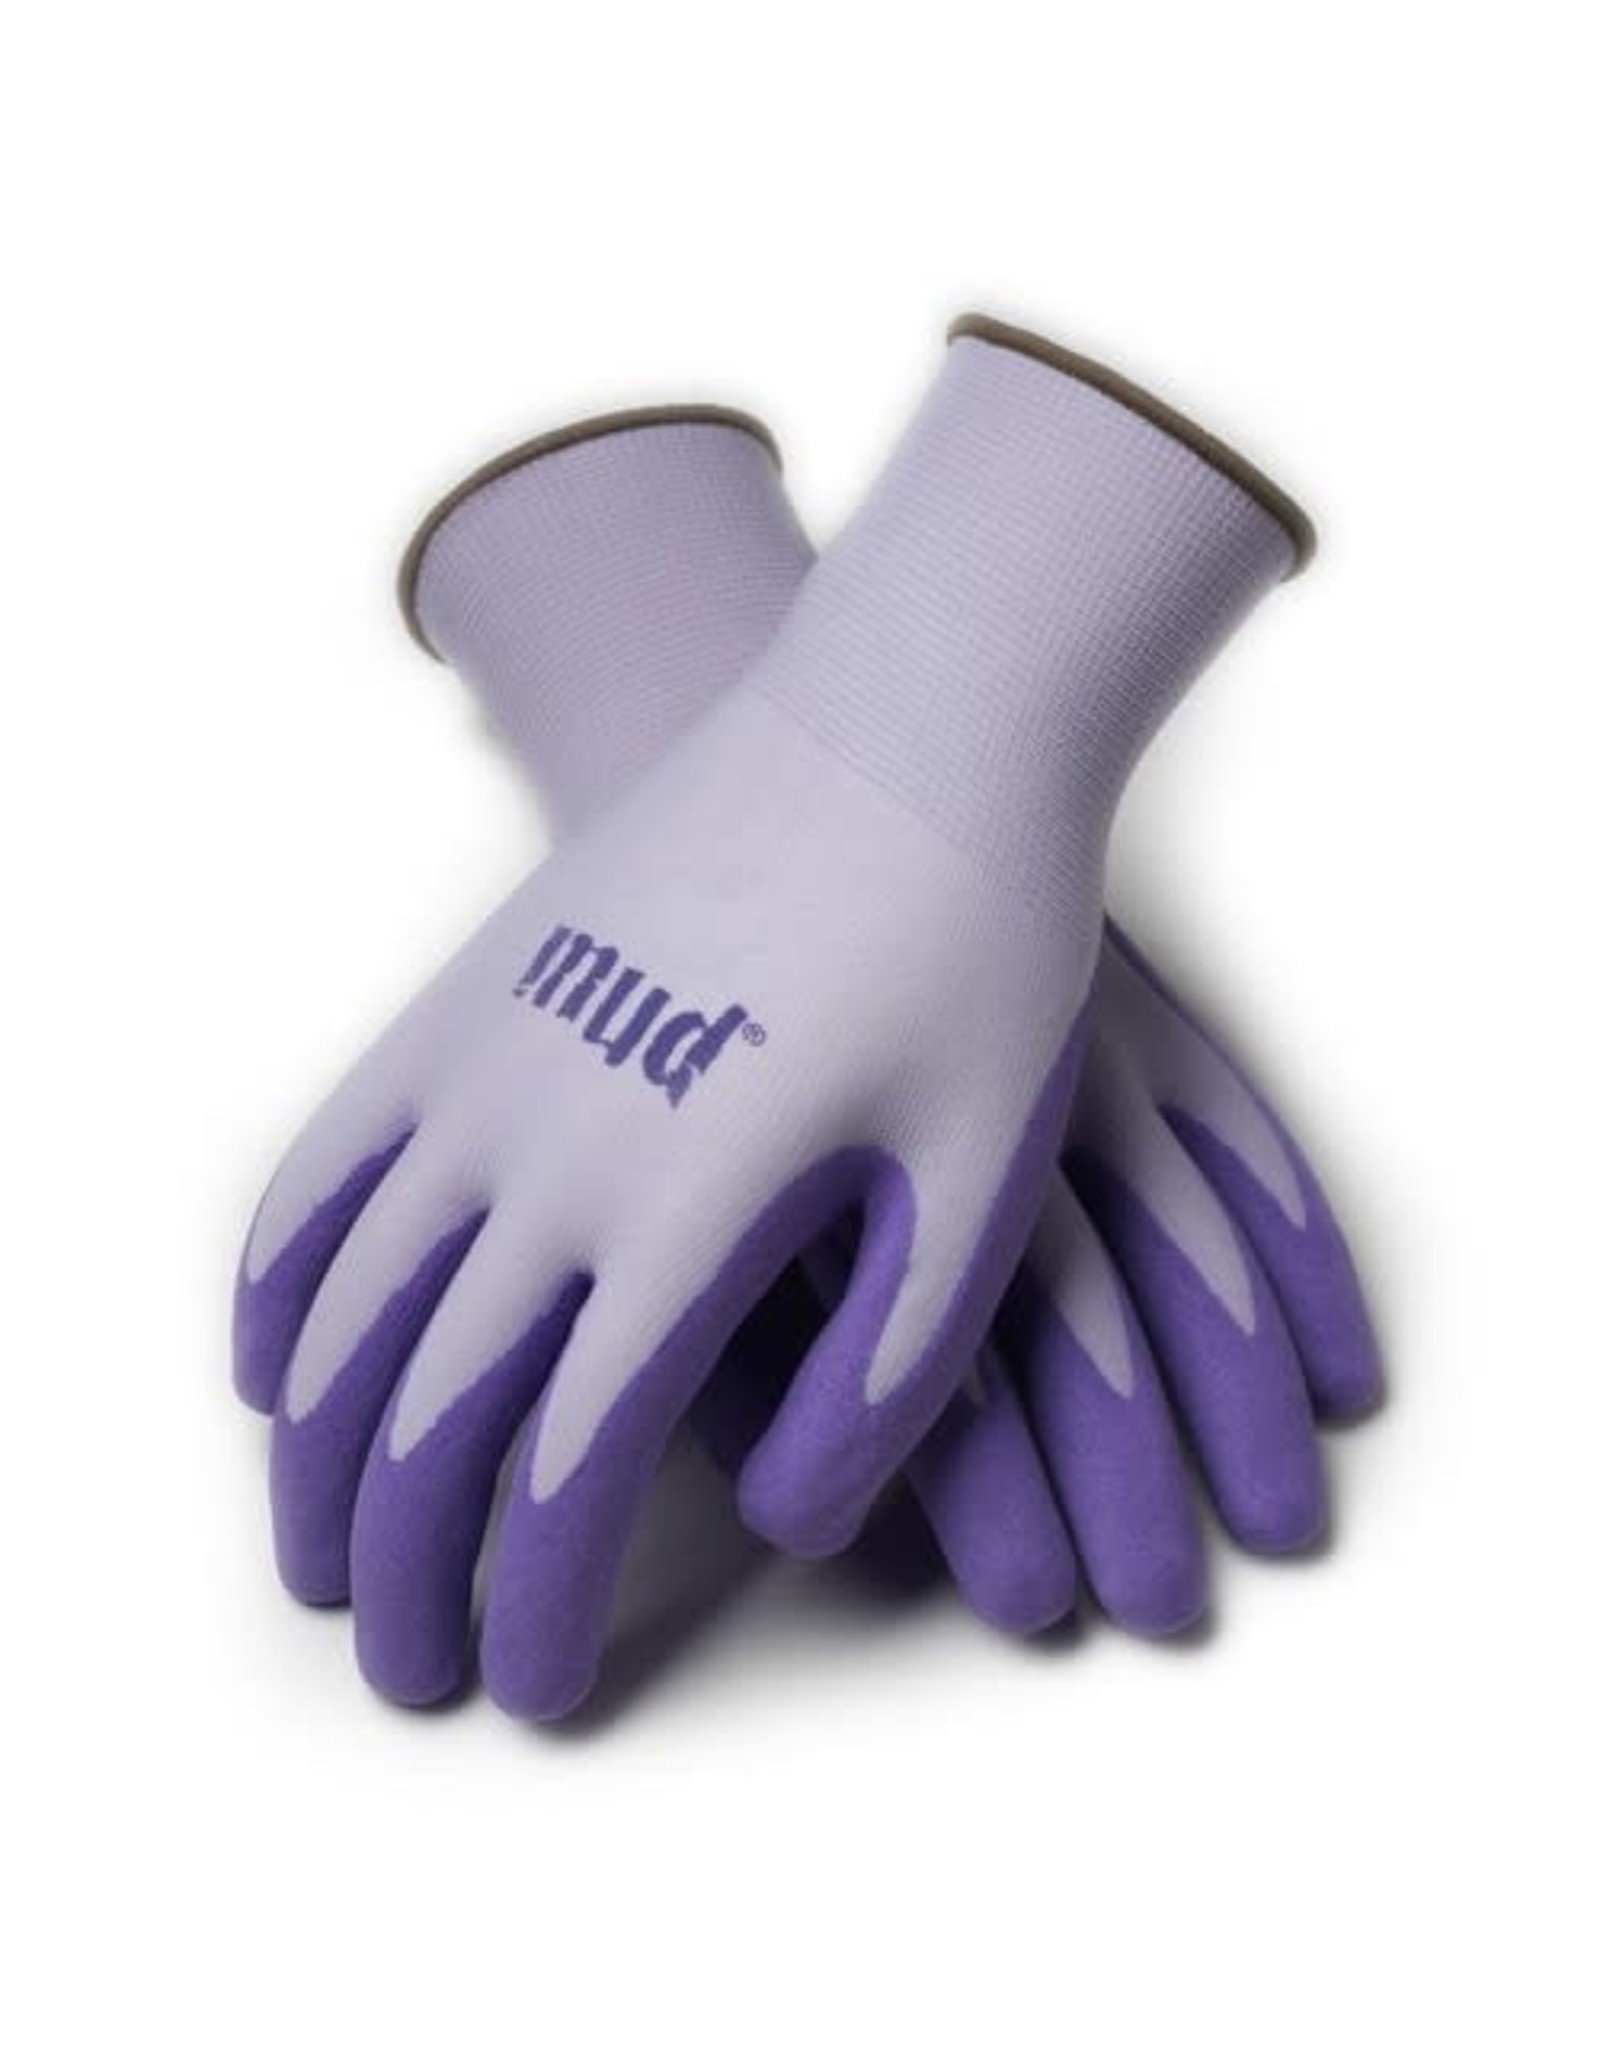 Simply Mud Gloves Passion Fruit - M